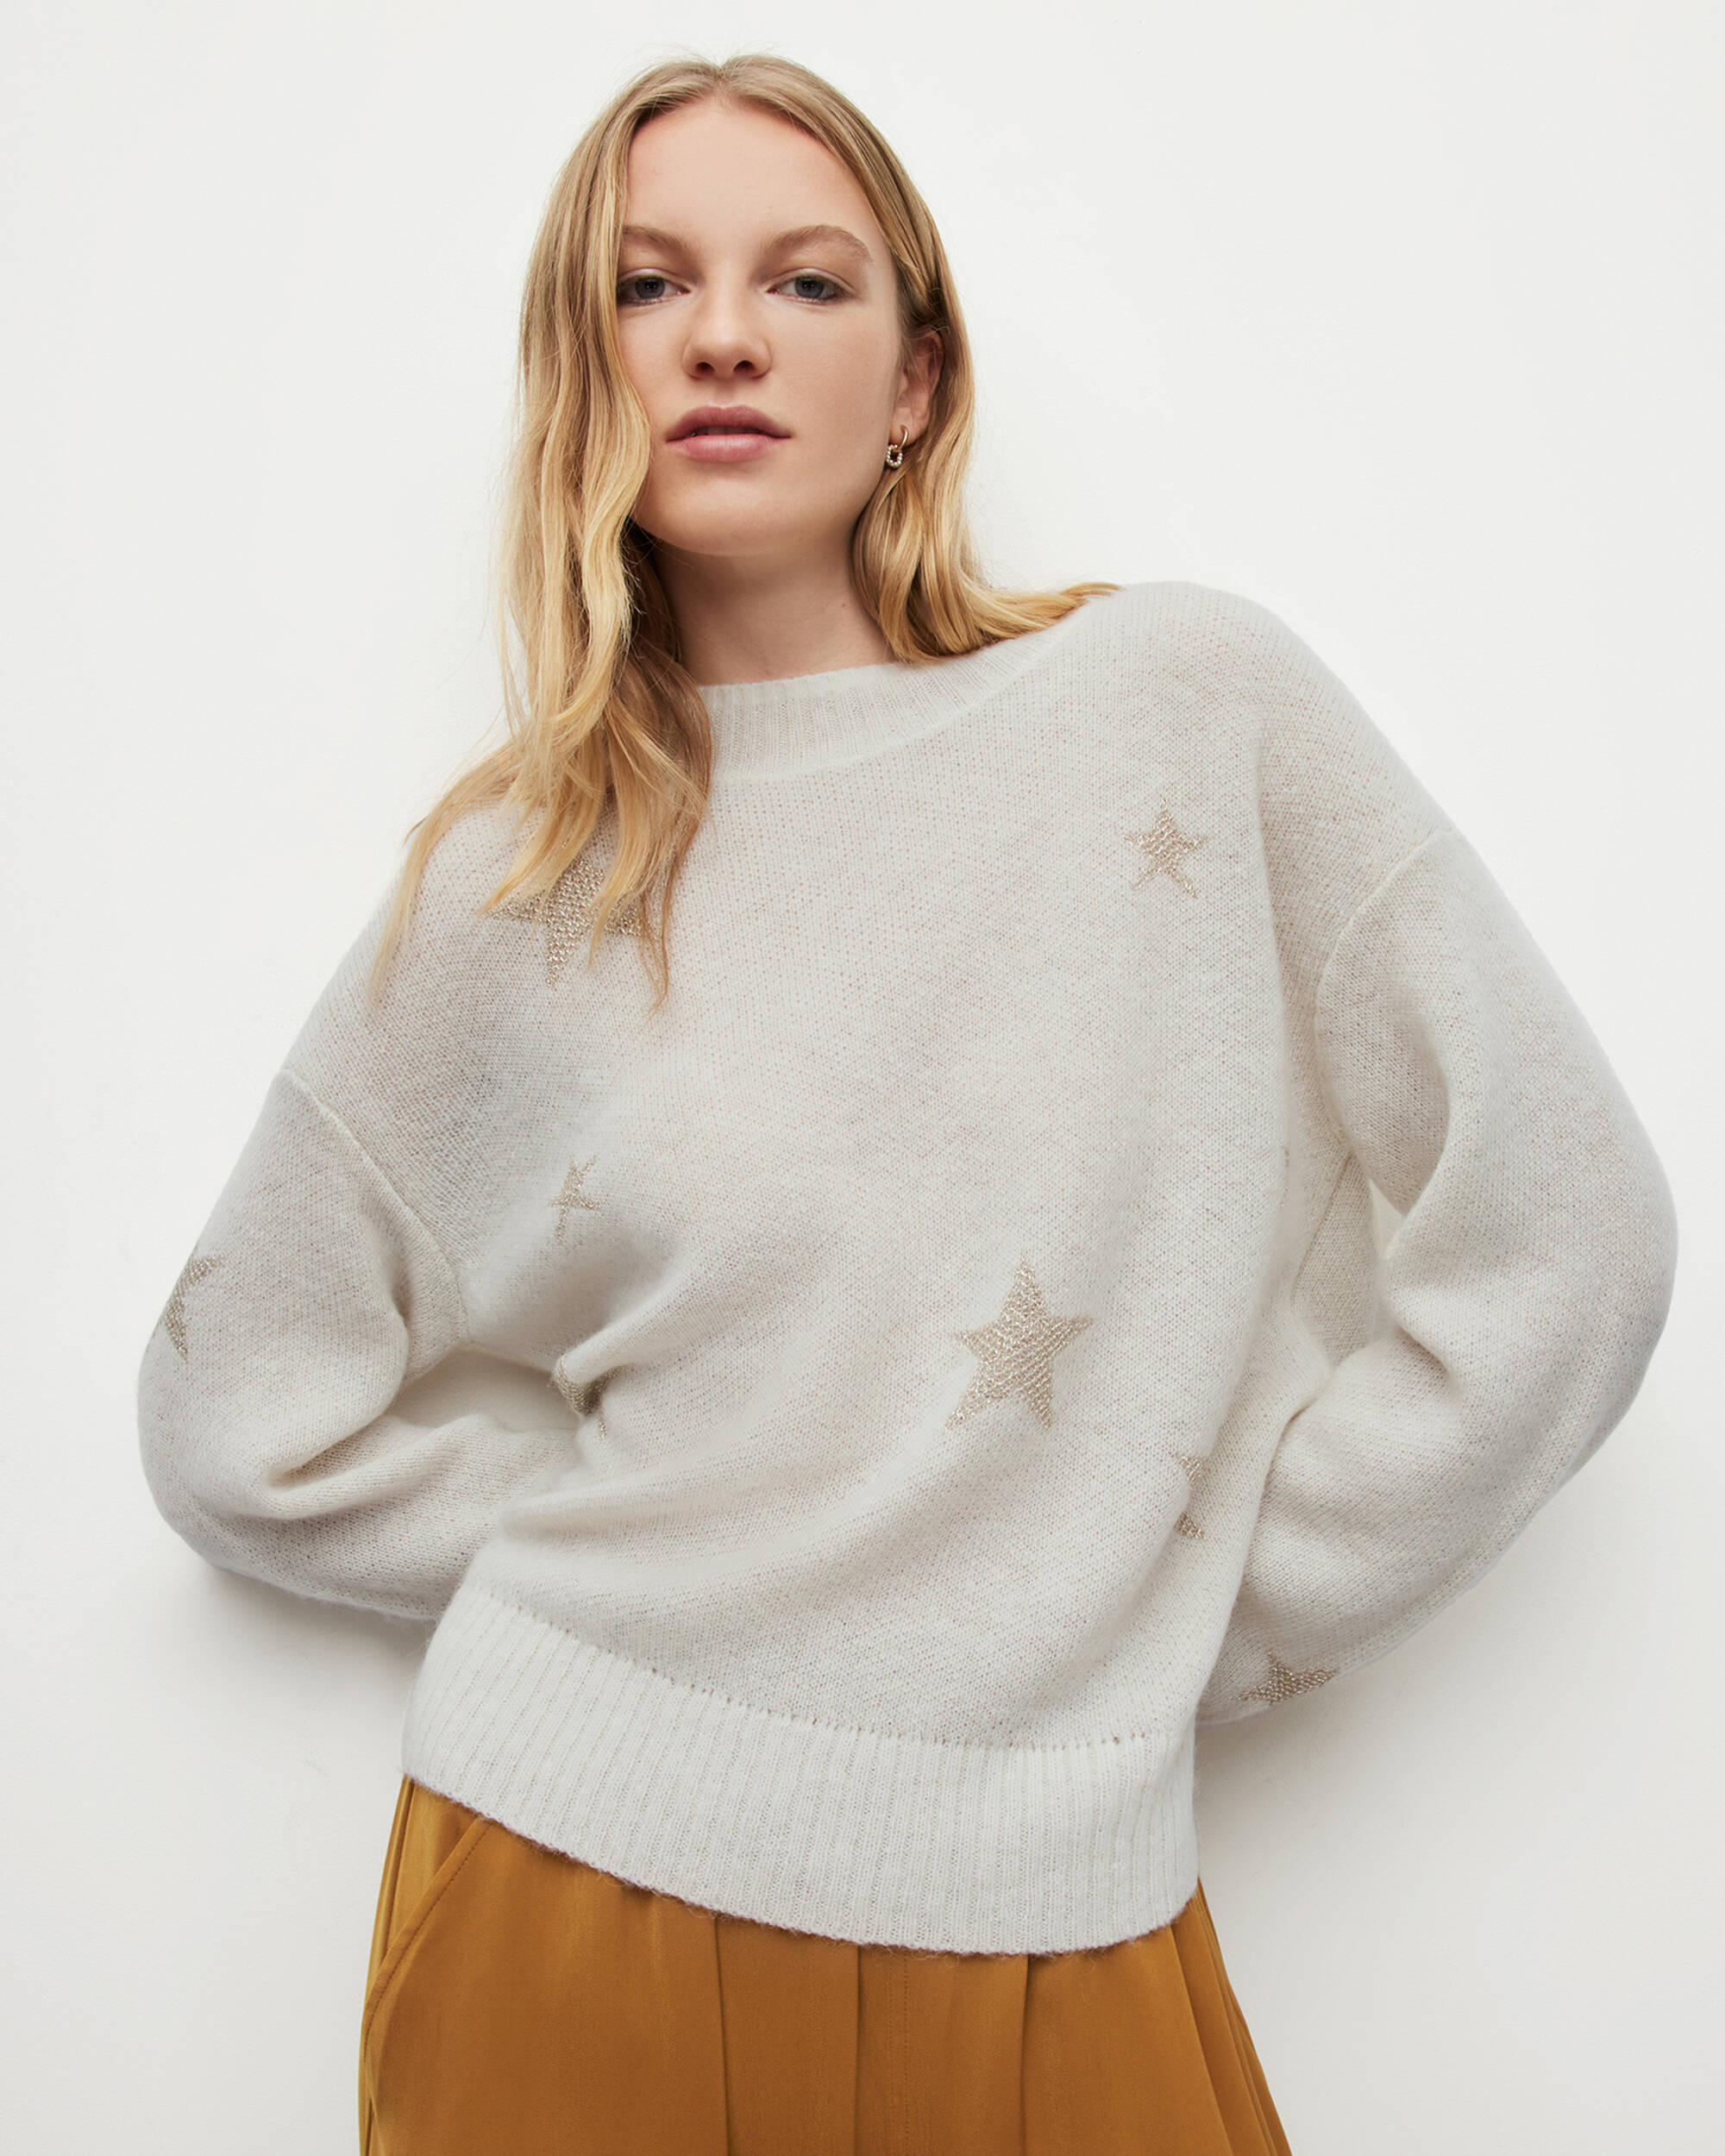 Astra Star Pullover  large image number 6